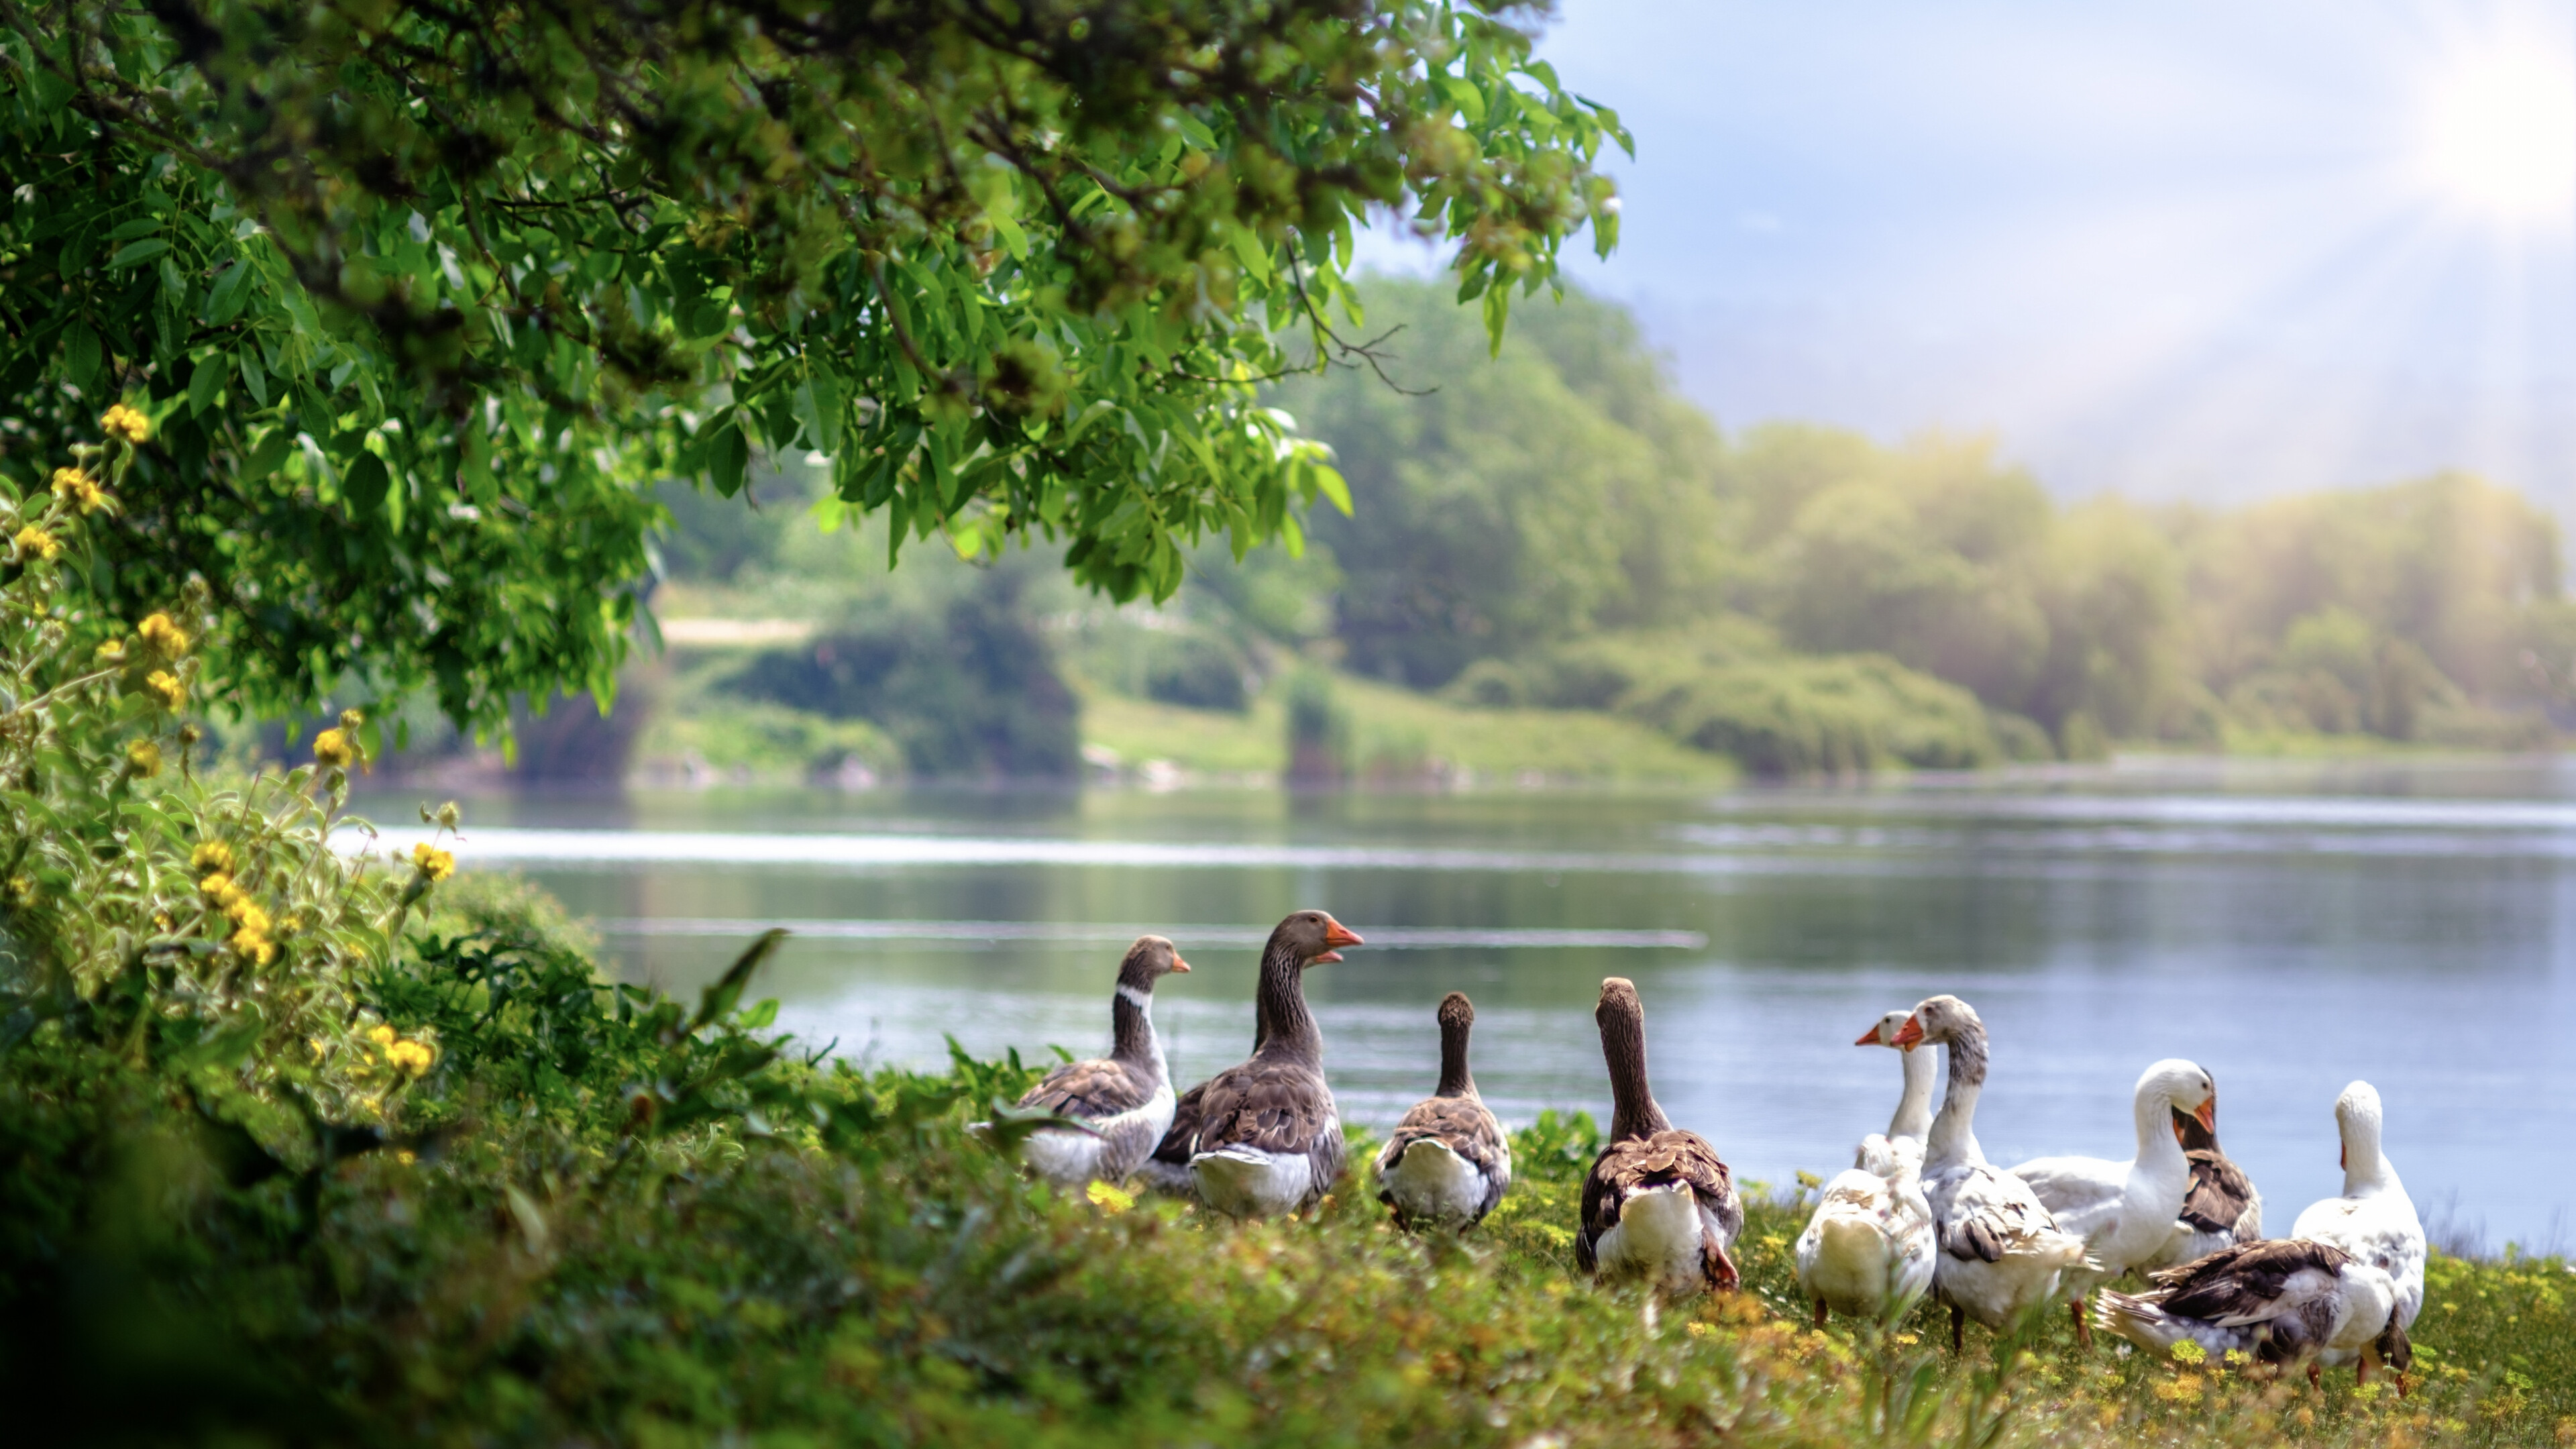 Geese: Wild birds, Aquatic birds, Lake, A bird like a large duck with a long neck. 3840x2160 4K Background.